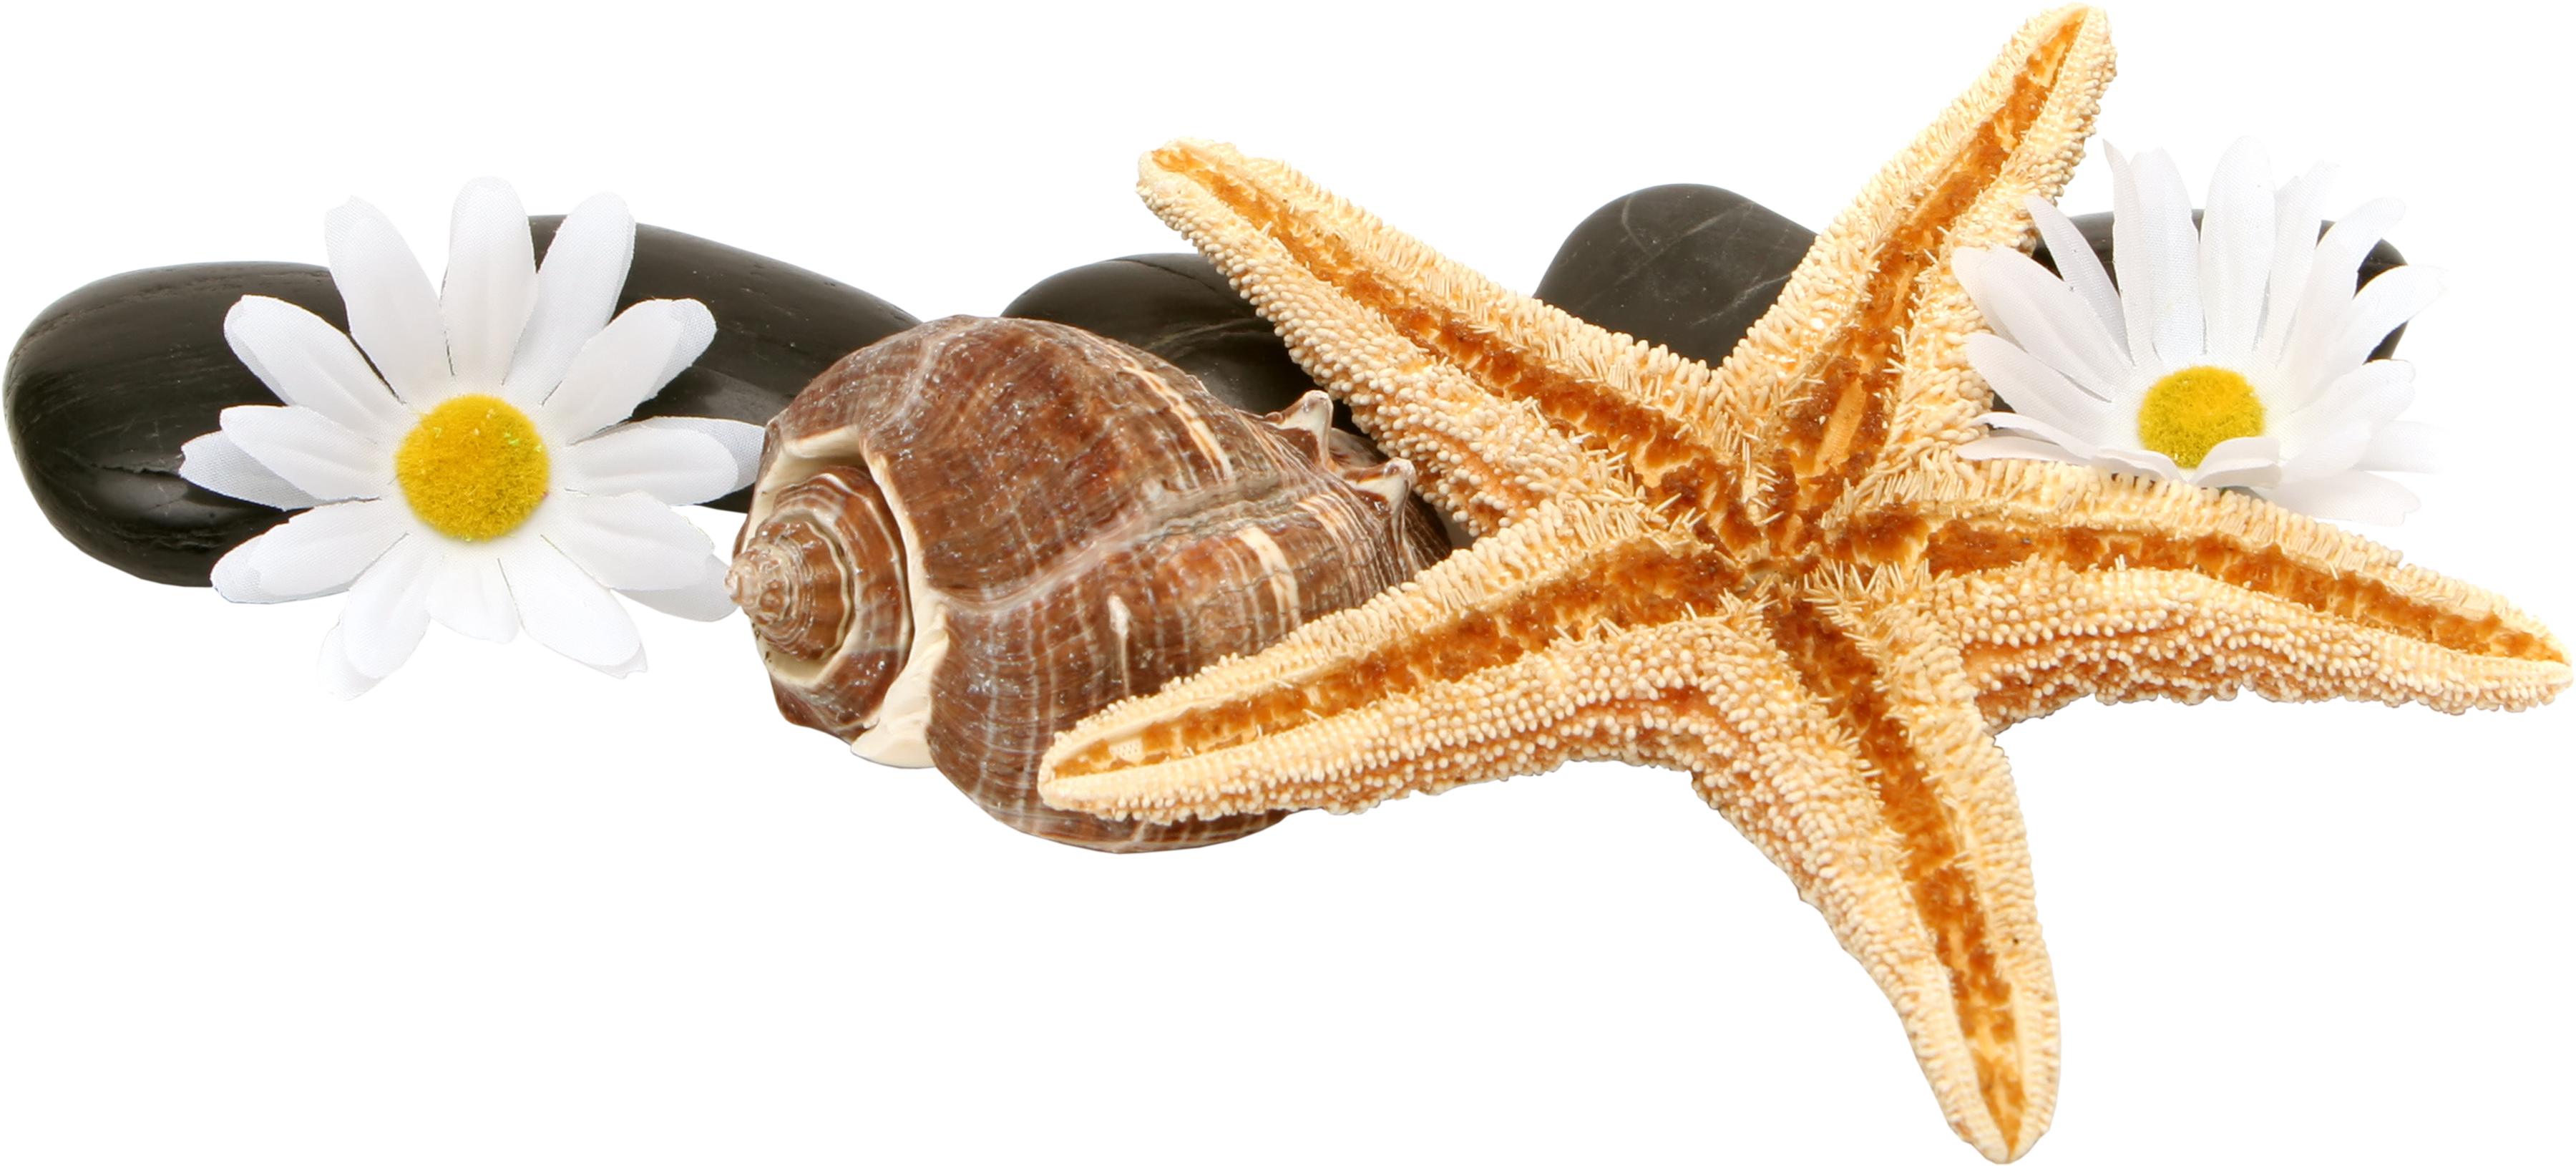 starfish png images collected for download crazypngm crazy png images download #28596